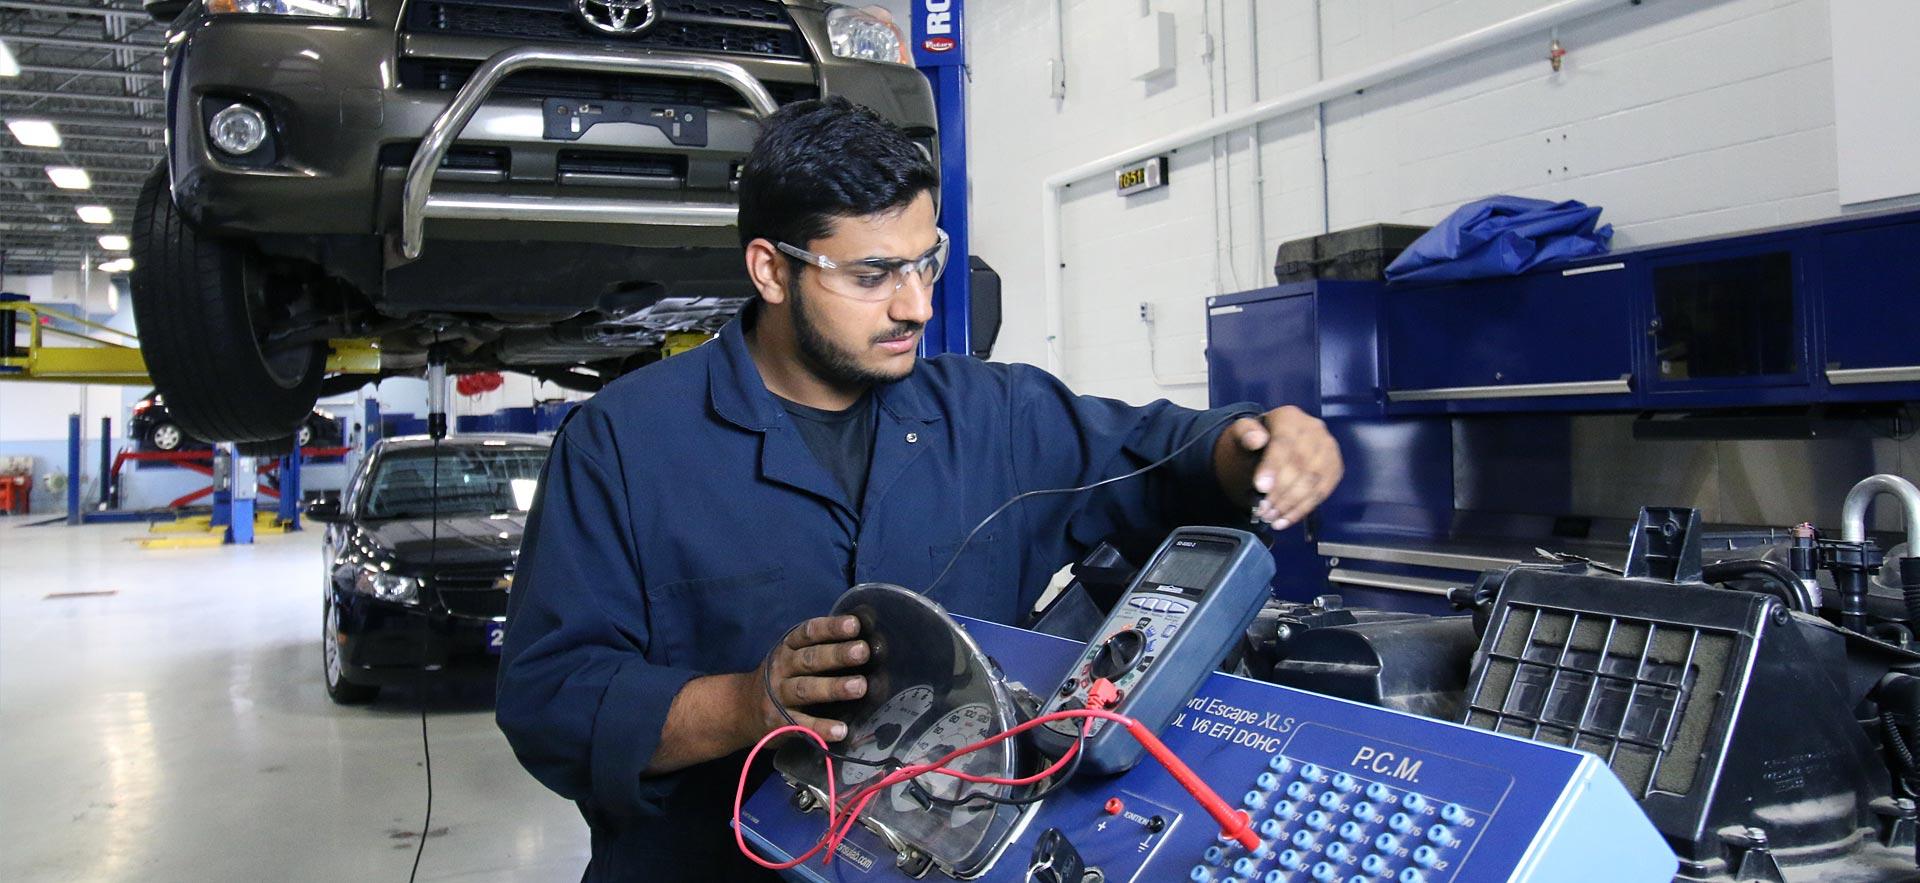 A male Motive Power Fundamentals - Automotive Repair student works on an engine.